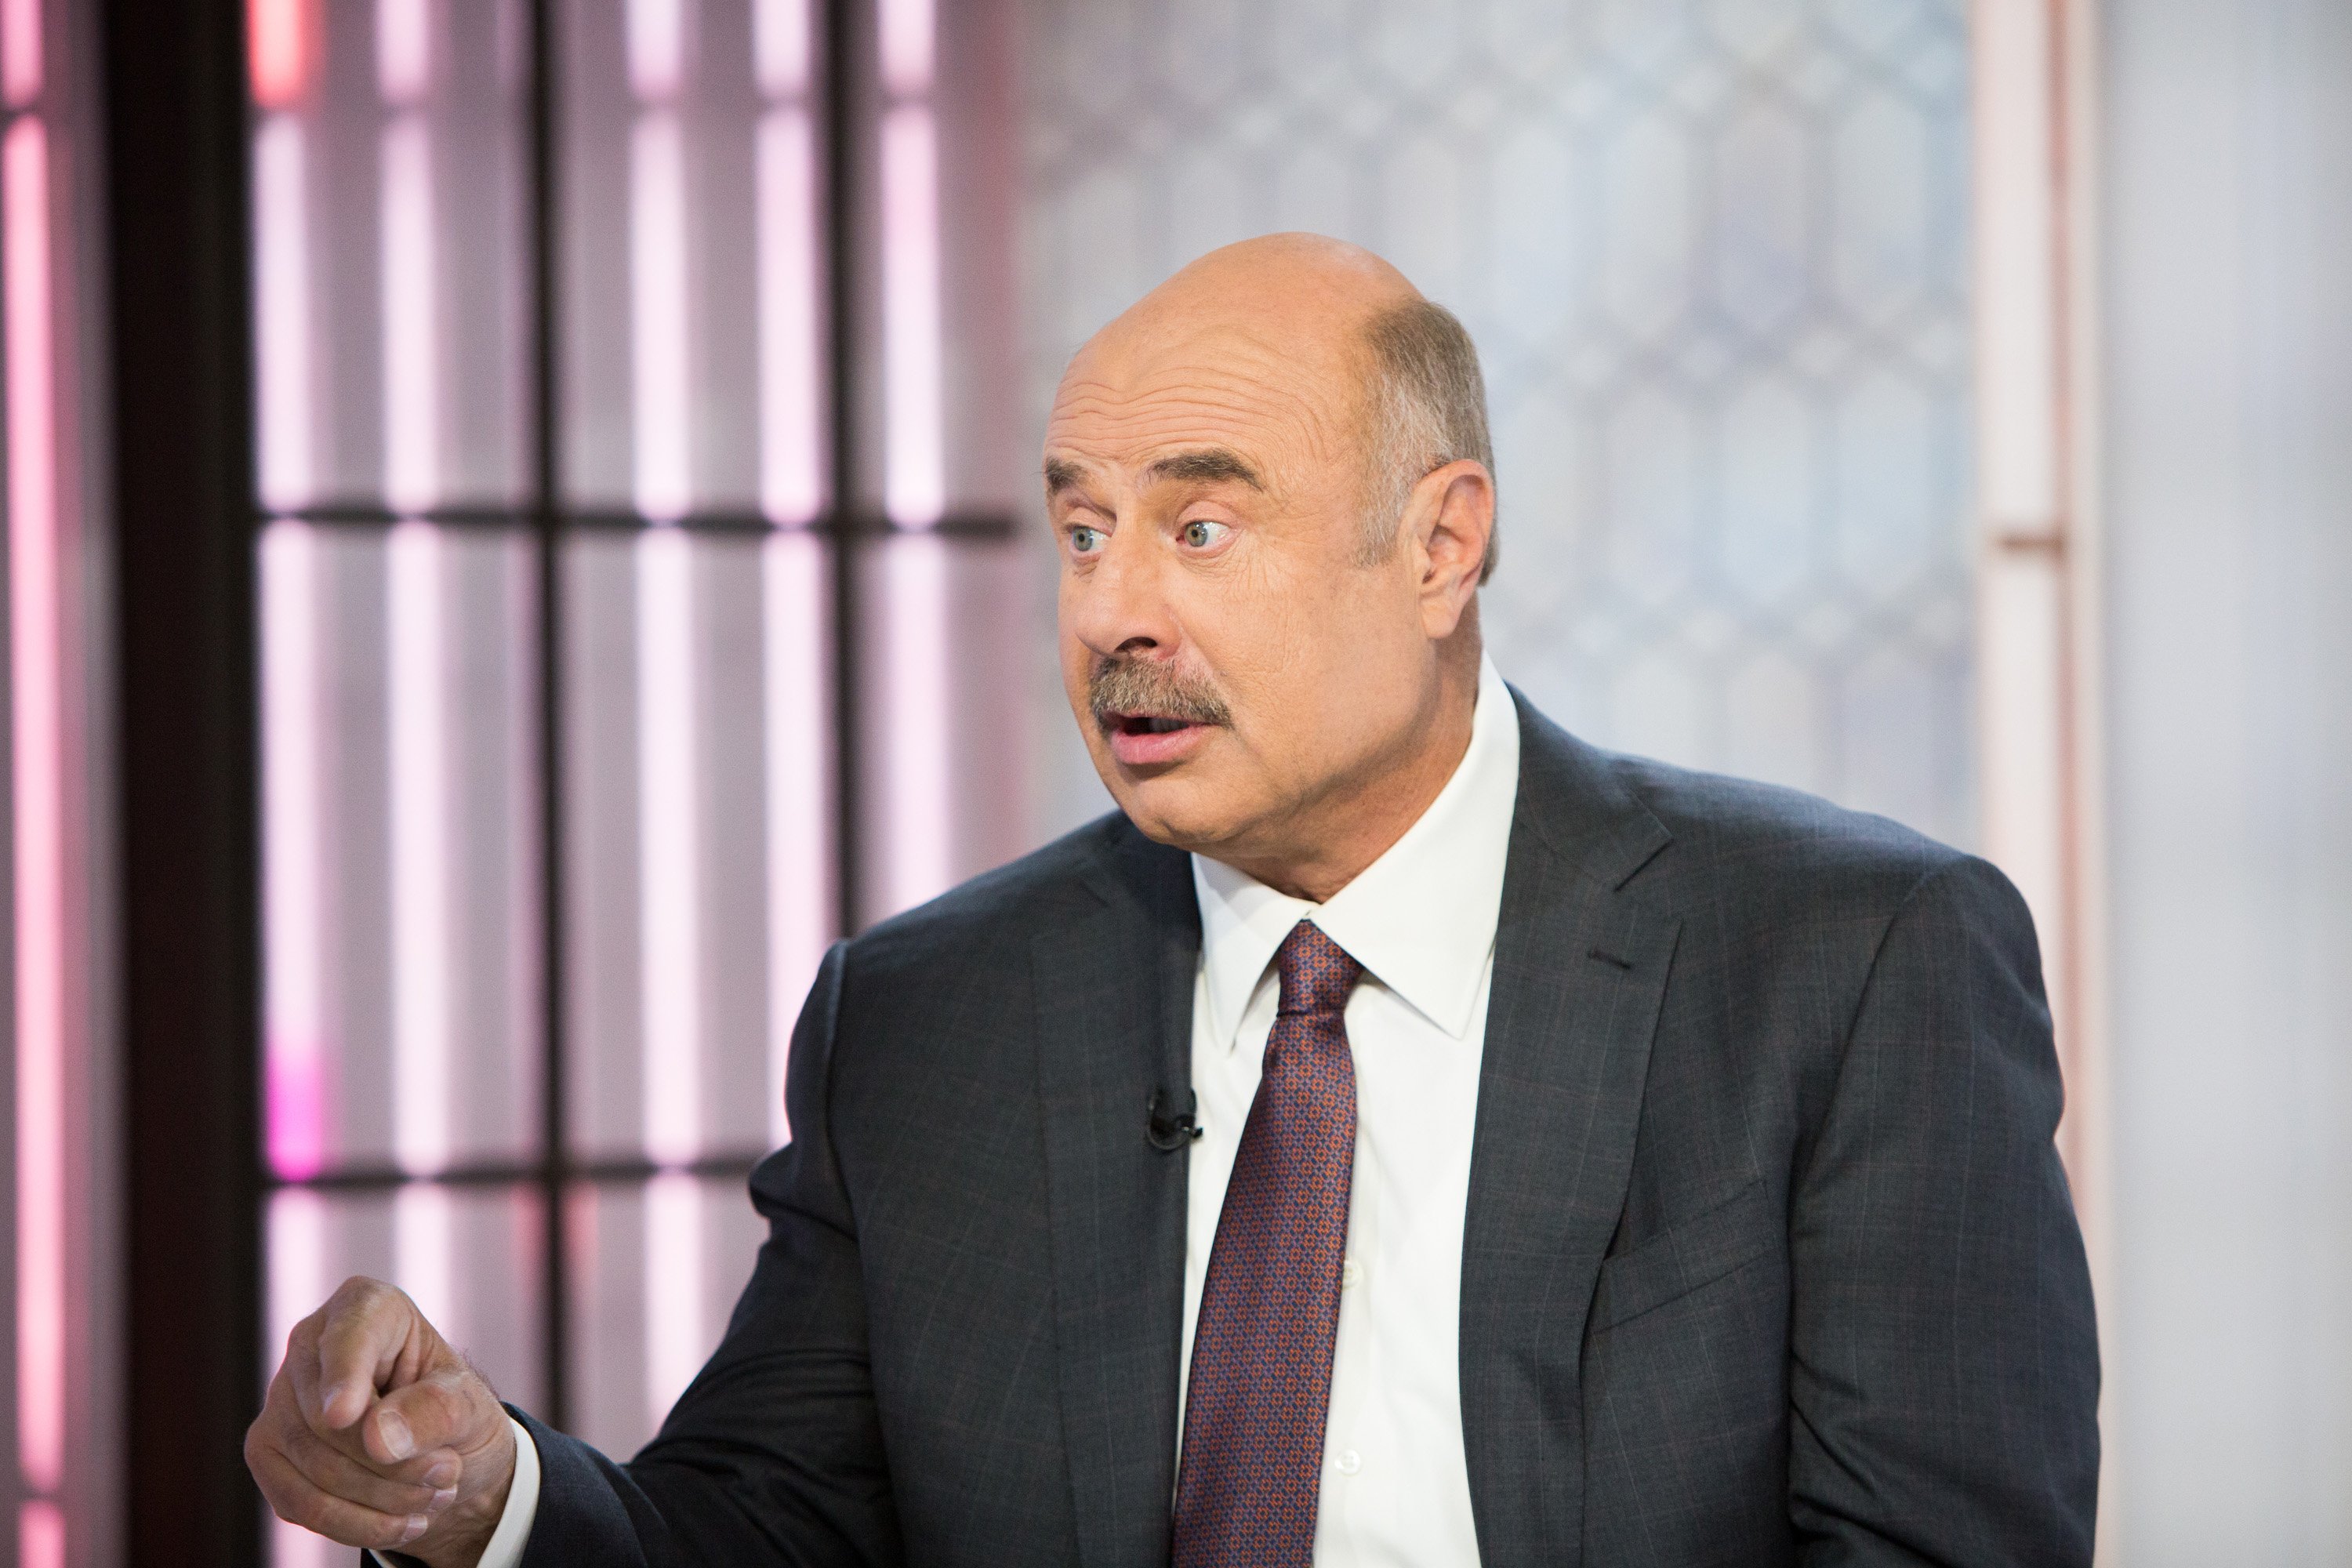 Television personality Dr. Phil McGraw during an appearance on the "Today" show Season 66 on October 26, 2017 | Source: Getty Images